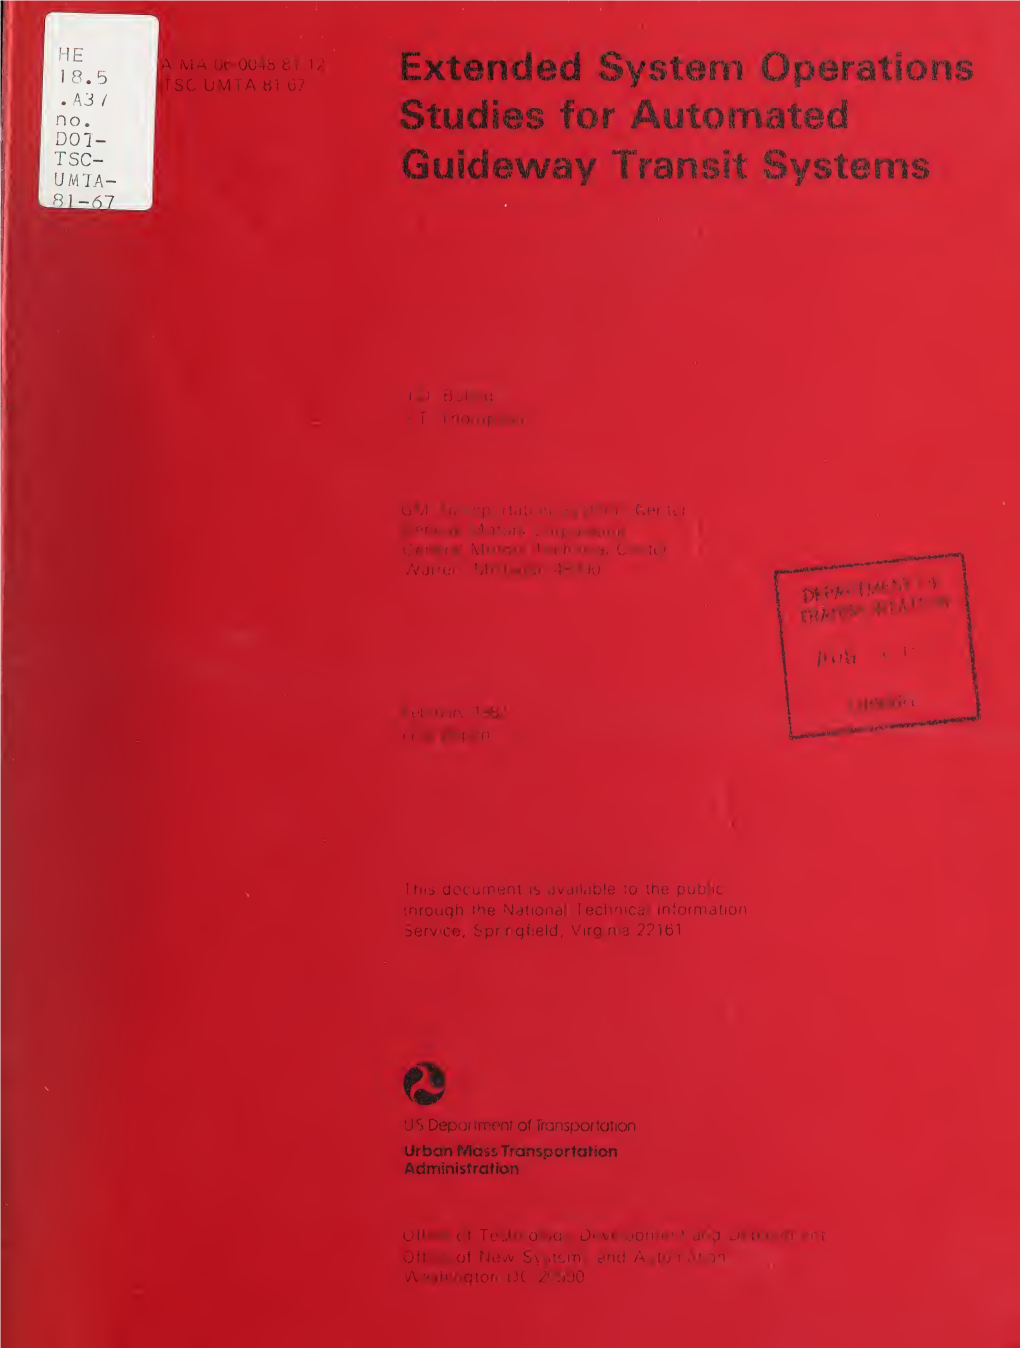 Extended System Operations Studies for Automated Guideway Transit